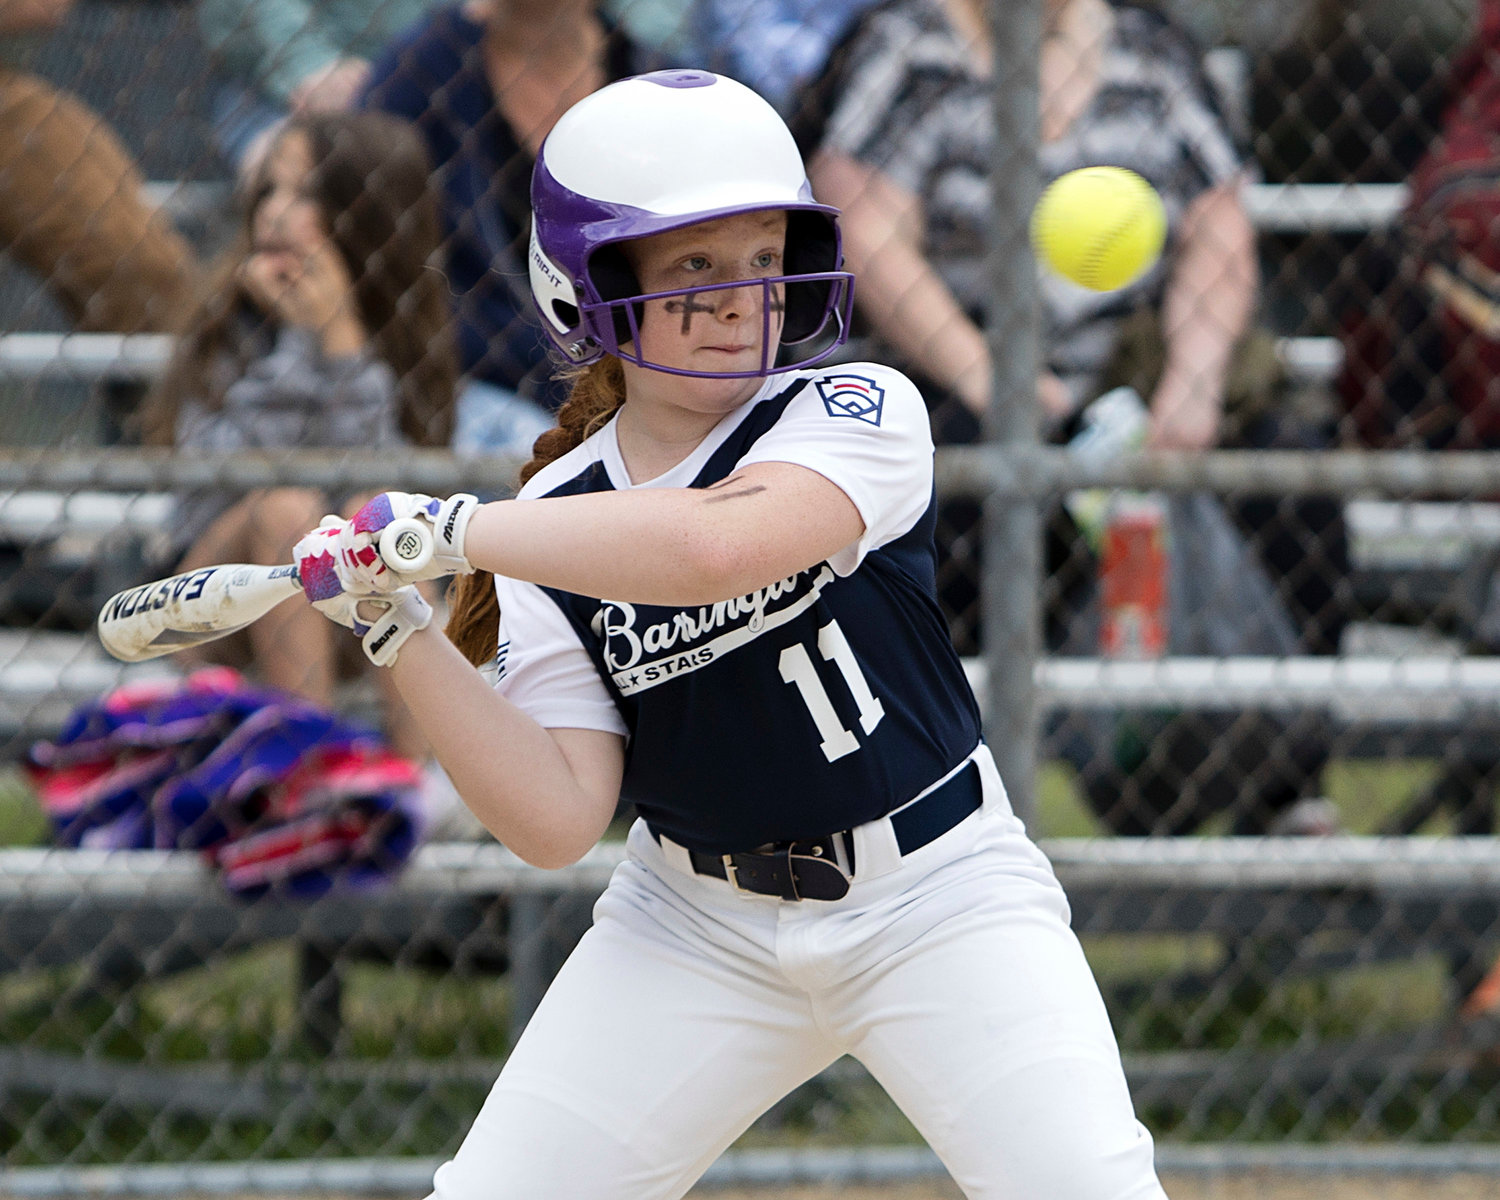 Claire Bickford keeps her eye on the ball while at bat against Middletown, Tuesday.